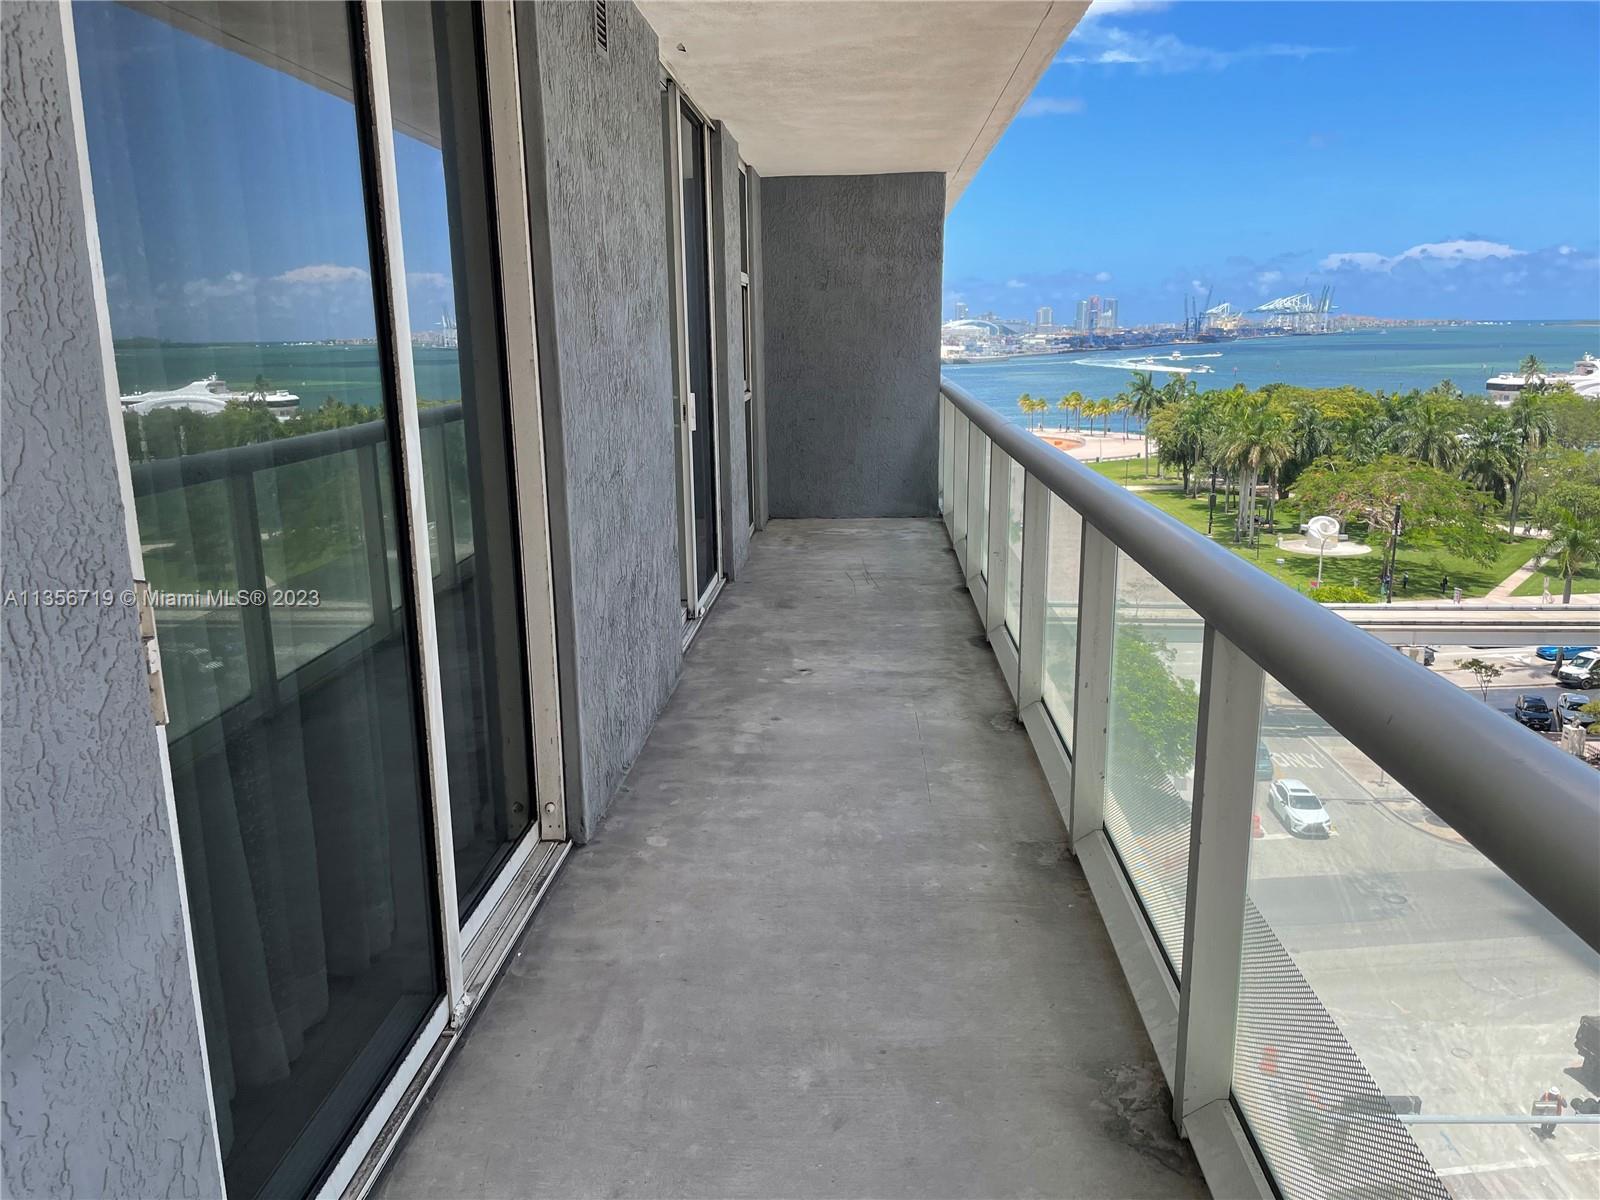 CLICK VIRTUAL TOUR LINK TO SEE VIDEO. Modern corporate style partially furnished bay view unit at 50 Biscayne, all tiled, Designer furniture by Rockwell Group, direct bayfront park bay view from balcony and very spacious closets, split floorplan, freshly painted. 50 Biscayne building is full of 5 star amenities including a state of the art gym w a view, resort style pool w cabanas, spa with steam room and sauna, party room, and more. Excellent central location right across Biscayne park near Bayside, American Airlines Arena, Whole Foods, Silverspot Cinema, people mover stop, govn't station, Brightline Station, & Brickell City Centre. Rent includes 1 parking, water, cable, internet. Short term possible with higher rent.